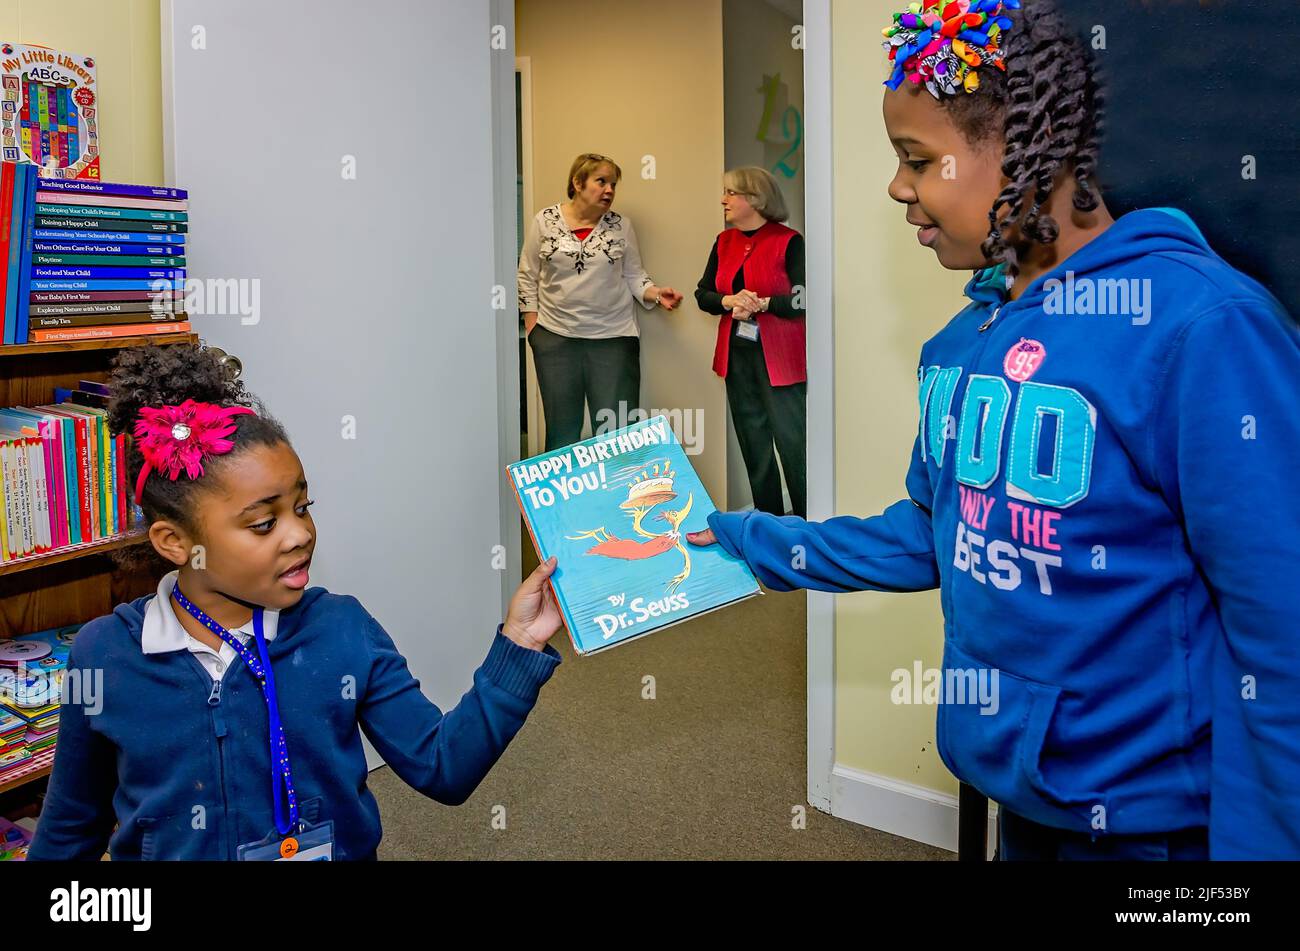 An African-American girl gives a Dr. Seuss book to a younger child during an after-school program, Feb. 28, 2013, in Columbus, Mississippi. Stock Photo